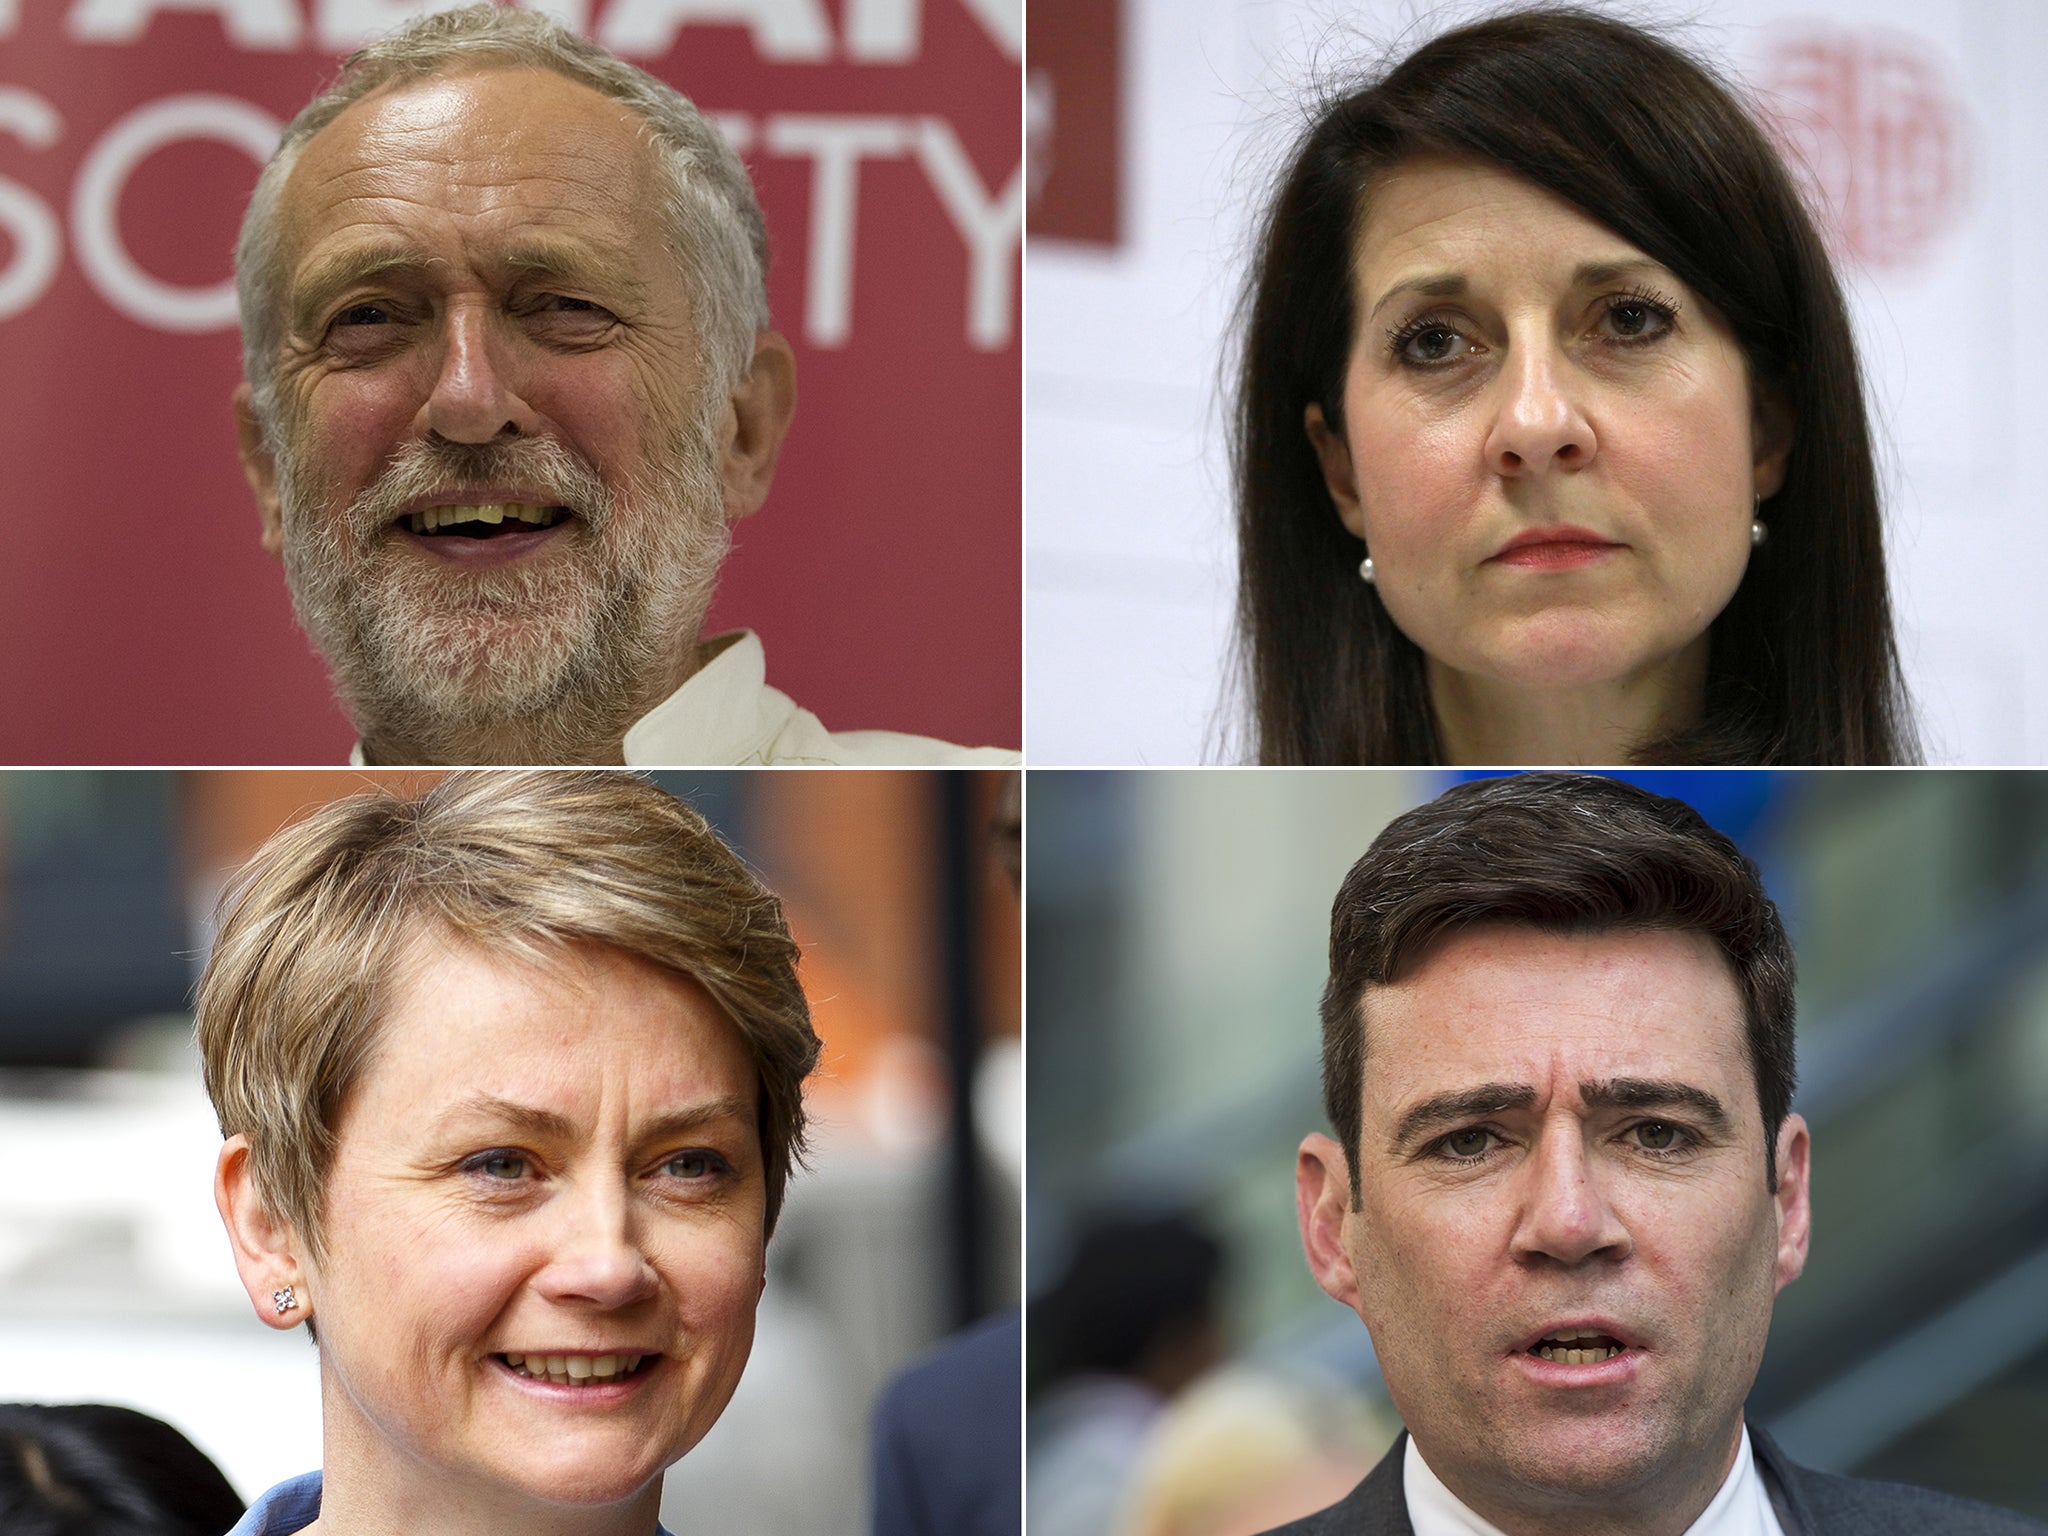 The four contenders (clockwise from top left): Jeremy Corbyn, Liz Kendall, Andy Burnham and Yvette Cooper